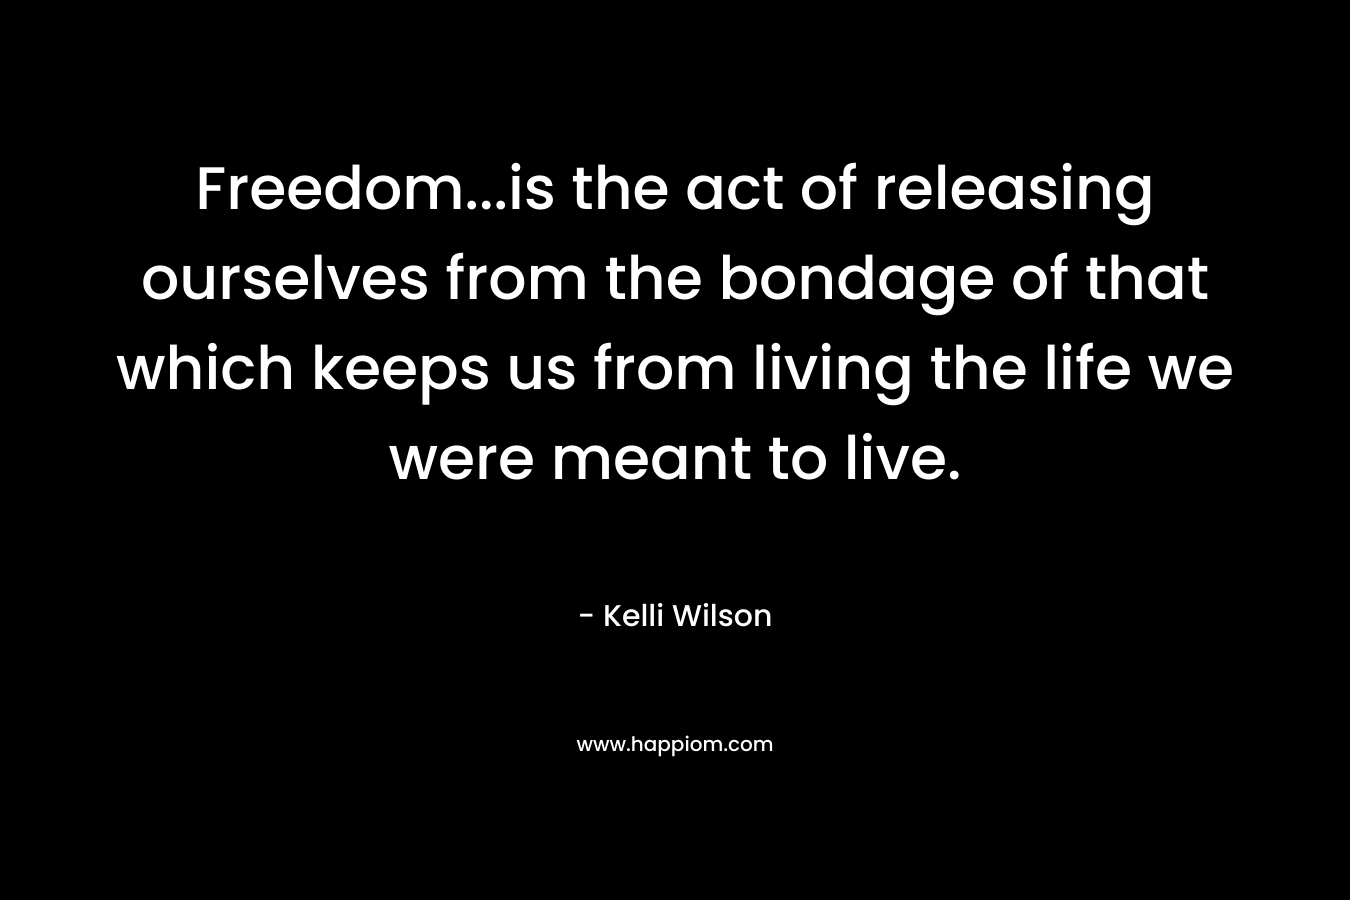 Freedom…is the act of releasing ourselves from the bondage of that which keeps us from living the life we were meant to live. – Kelli Wilson